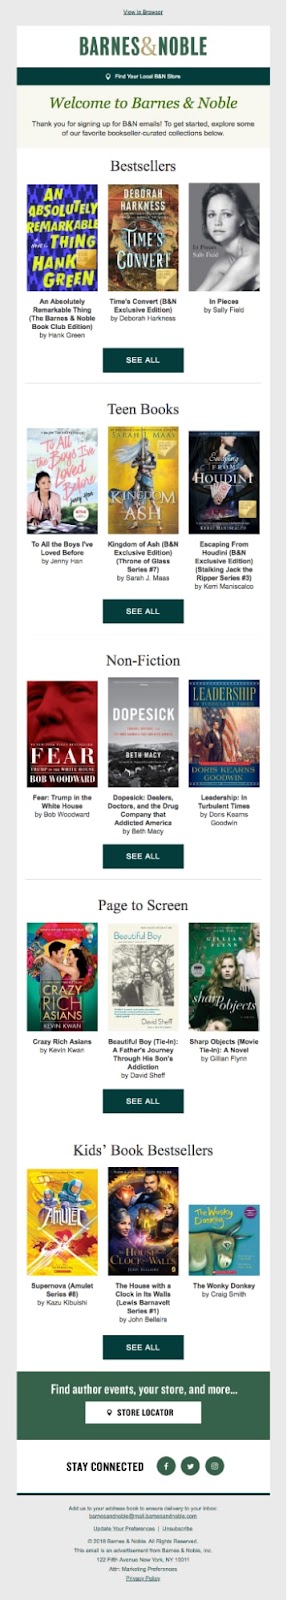 barnes noble product recommendation email